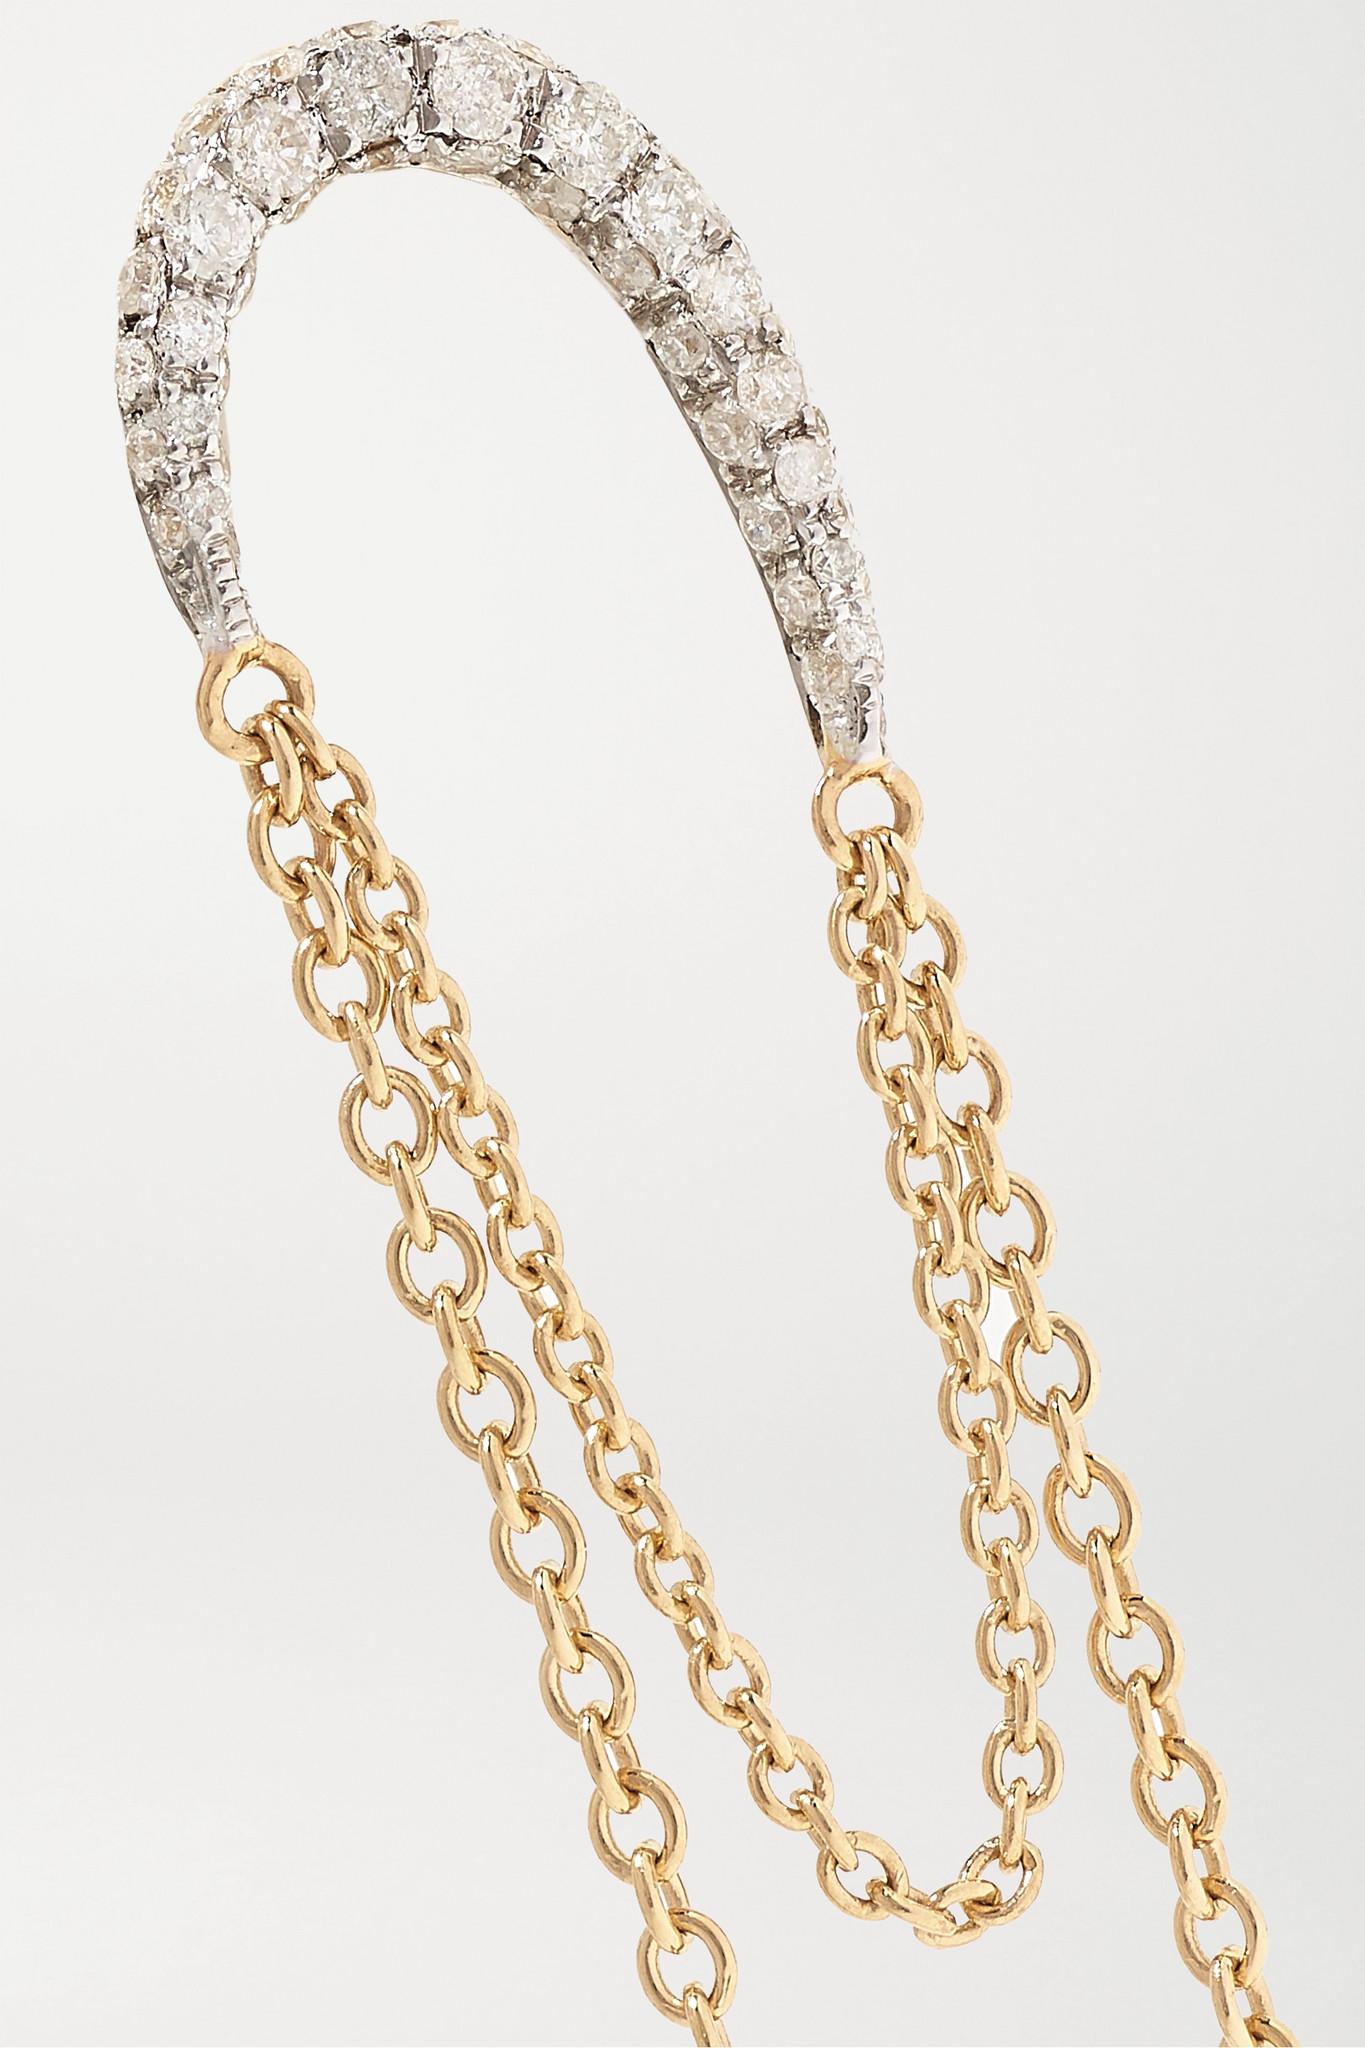 Round Cut Yvonne Leon's Earring Double Chain in 18 Karat Yellow Gold and Diamonds For Sale